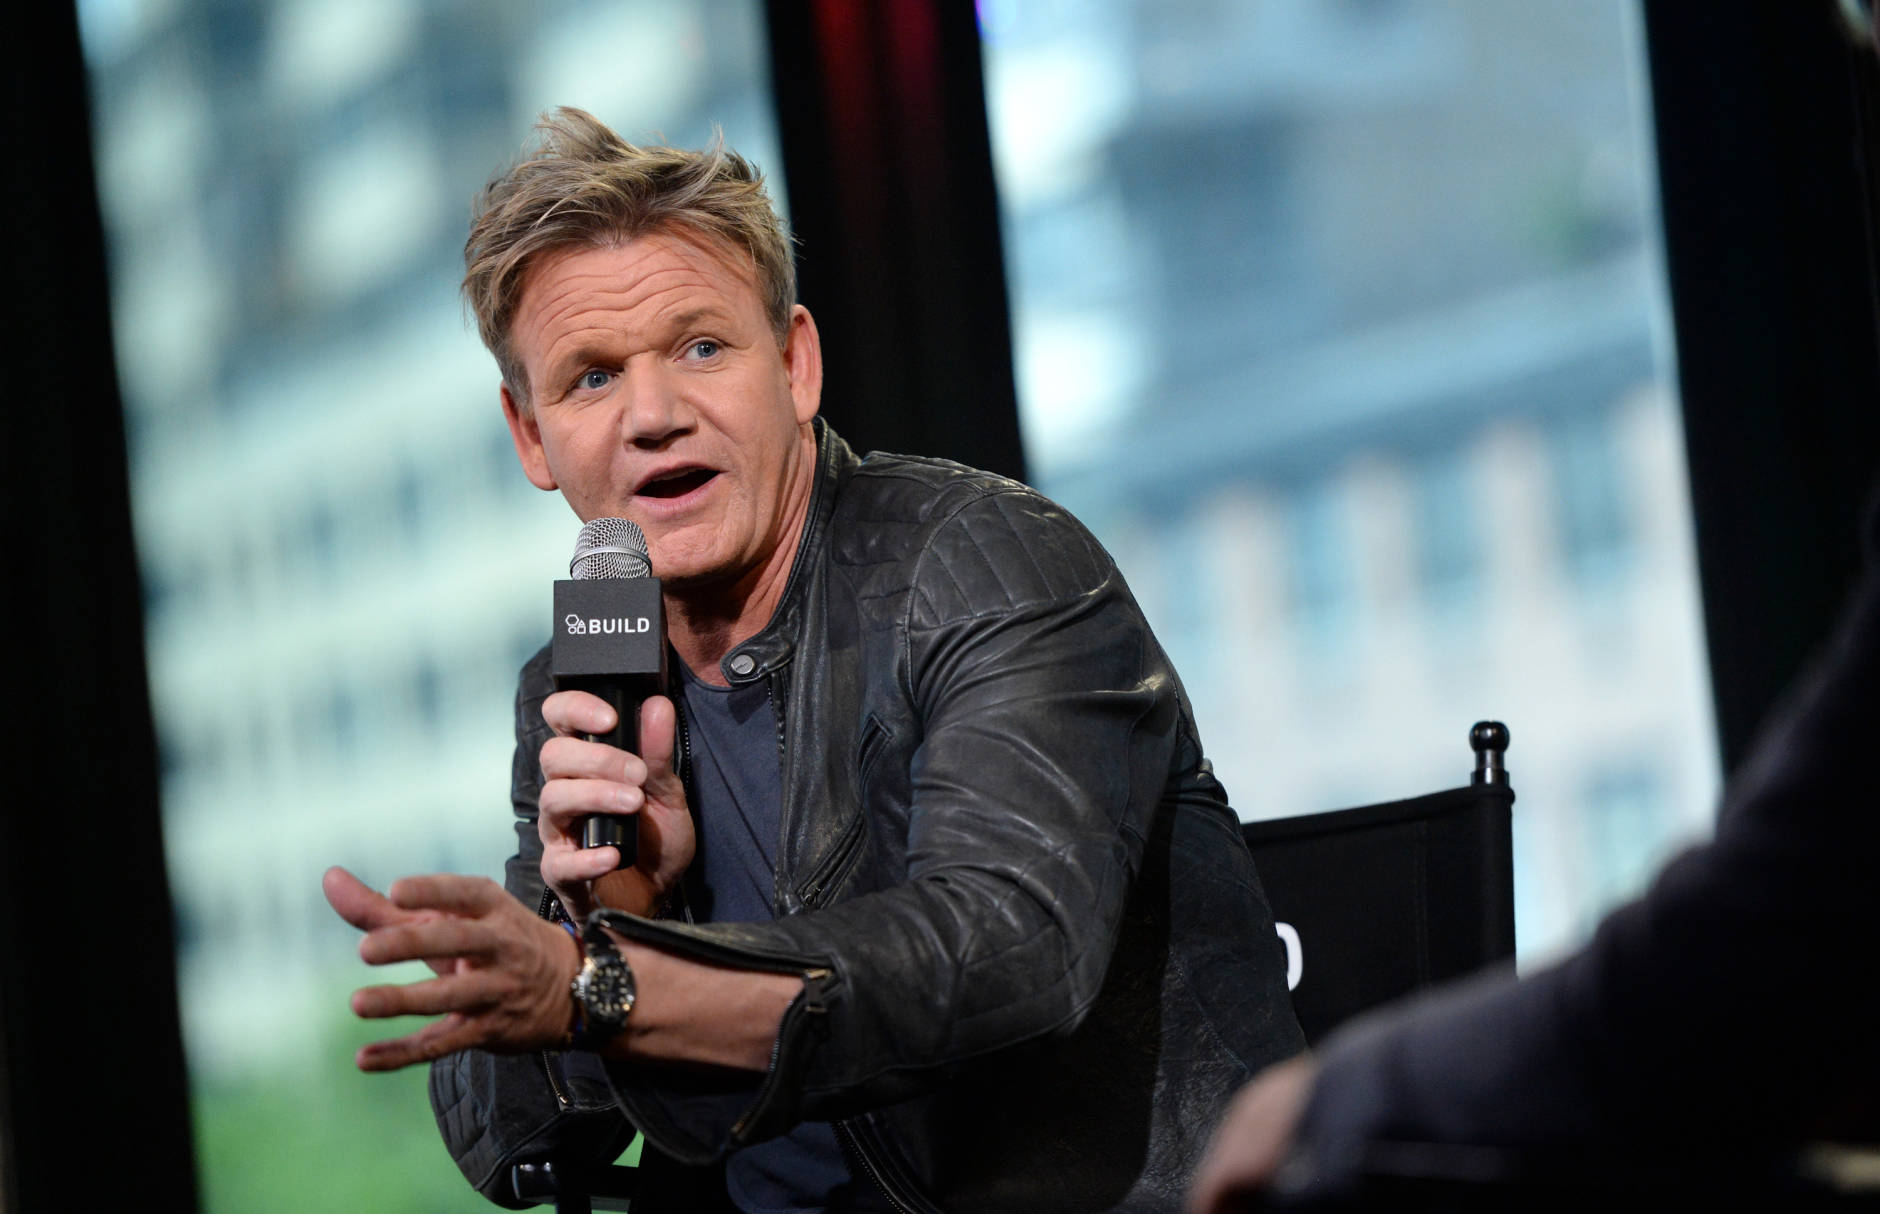 Chef Gordon Ramsay participates in AOL's BUILD Speaker Series to discuss discusses his new MasterChef mobile game at AOL Studios on Wednesday, June 22, 2016, in New York. (Photo by Evan Agostini/Invision/AP)